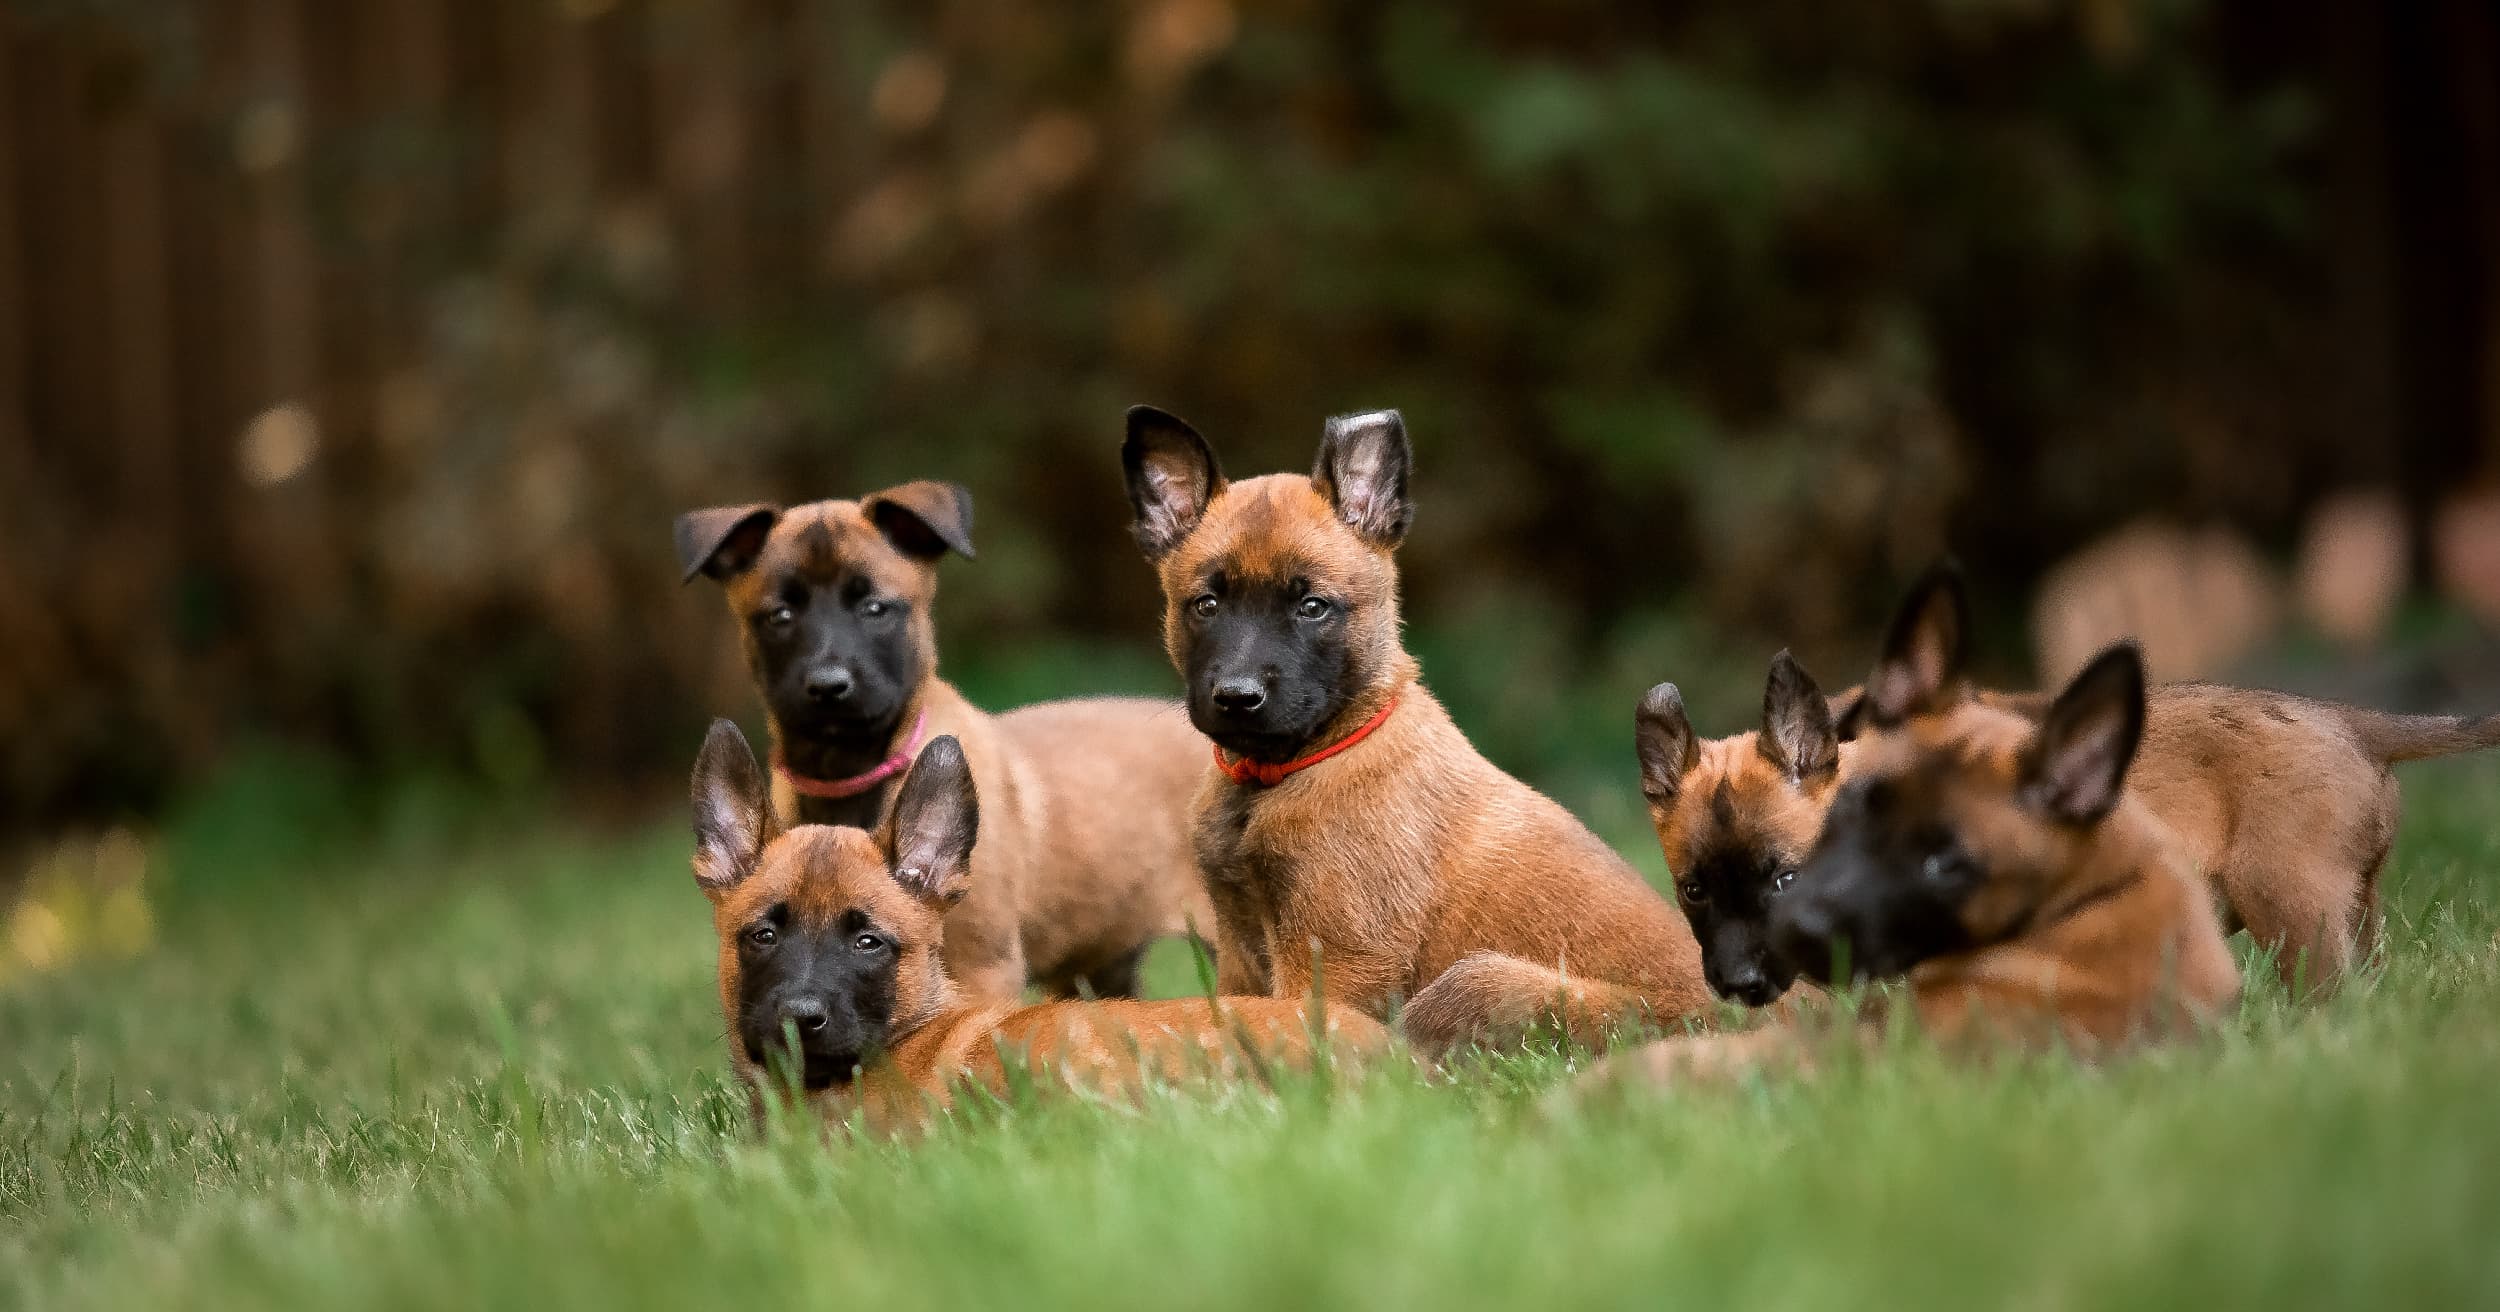 A group of puppies lying in the grass outside.